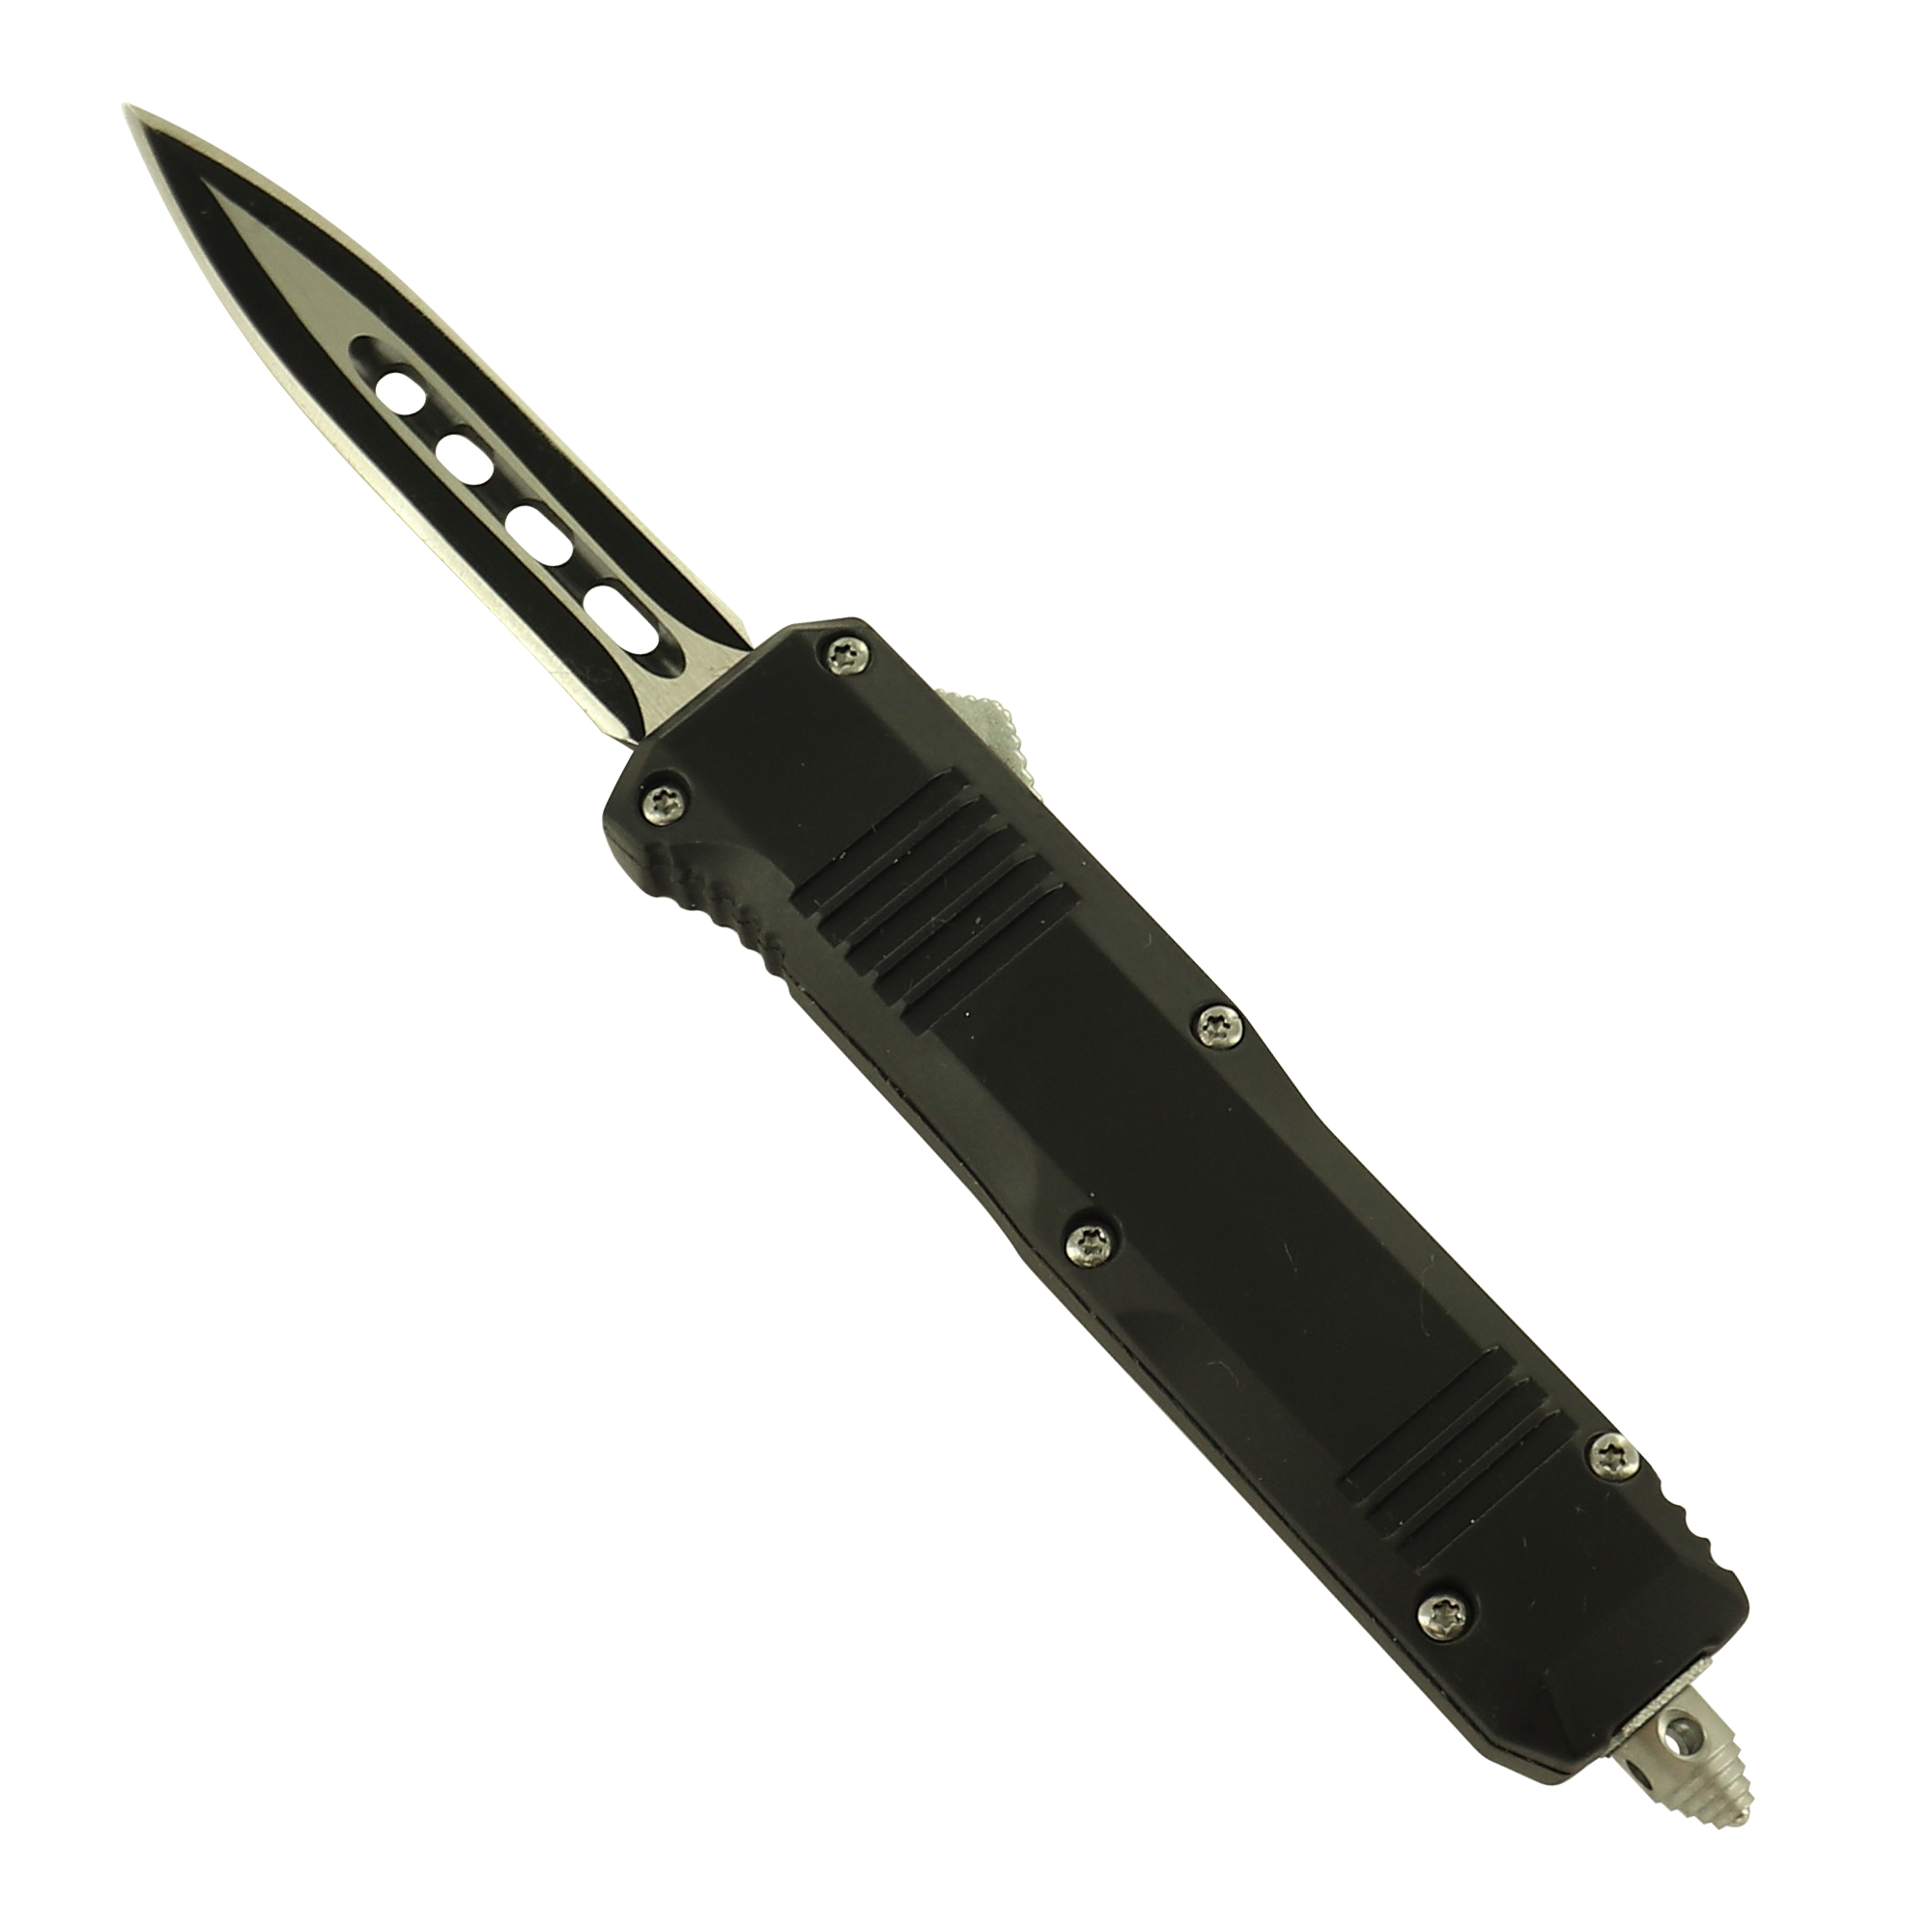 Pressure Point Miniature Automatic Out the Front KNIFE